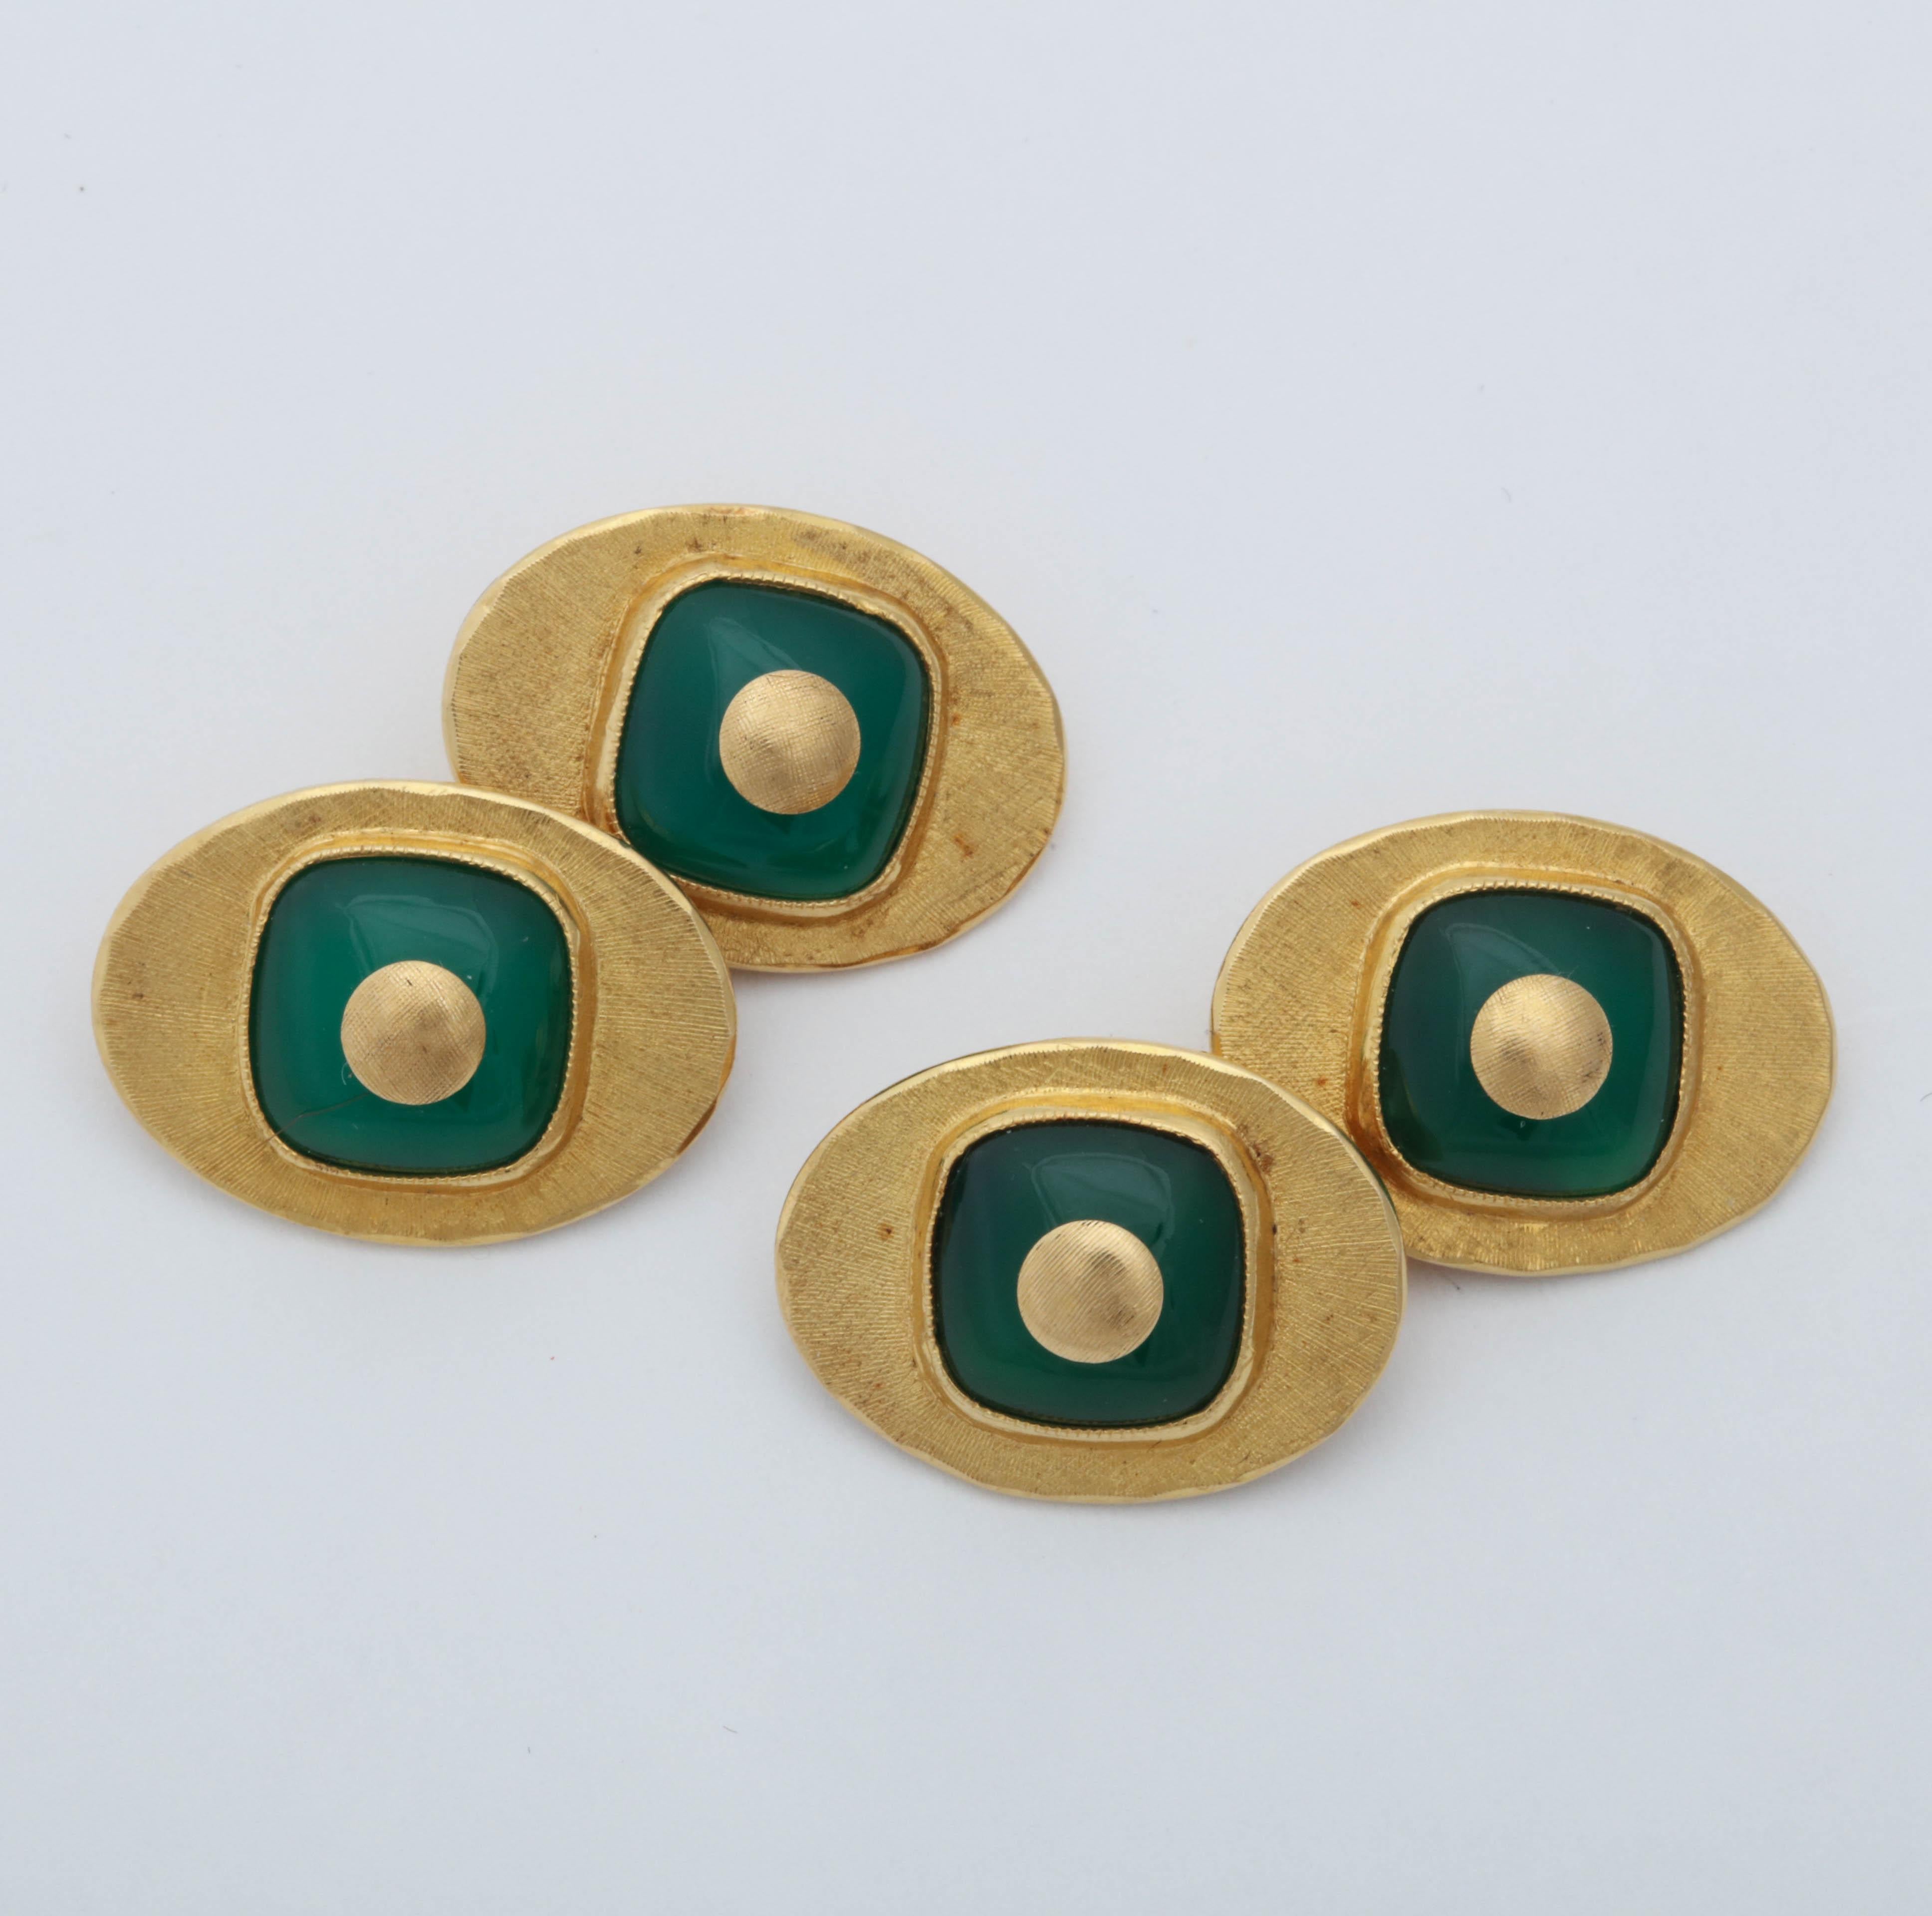 One Pair Of Gentleman's 18kt Brushed Gold Doublesided Cufflinks Centering Four Custom Cut Buff Cut Chrysoprase ,Green Chalcedony Stones. Each Stone Centering Four 18kt Gold Pellet Pieces. Designed In Italy I The 1970's.